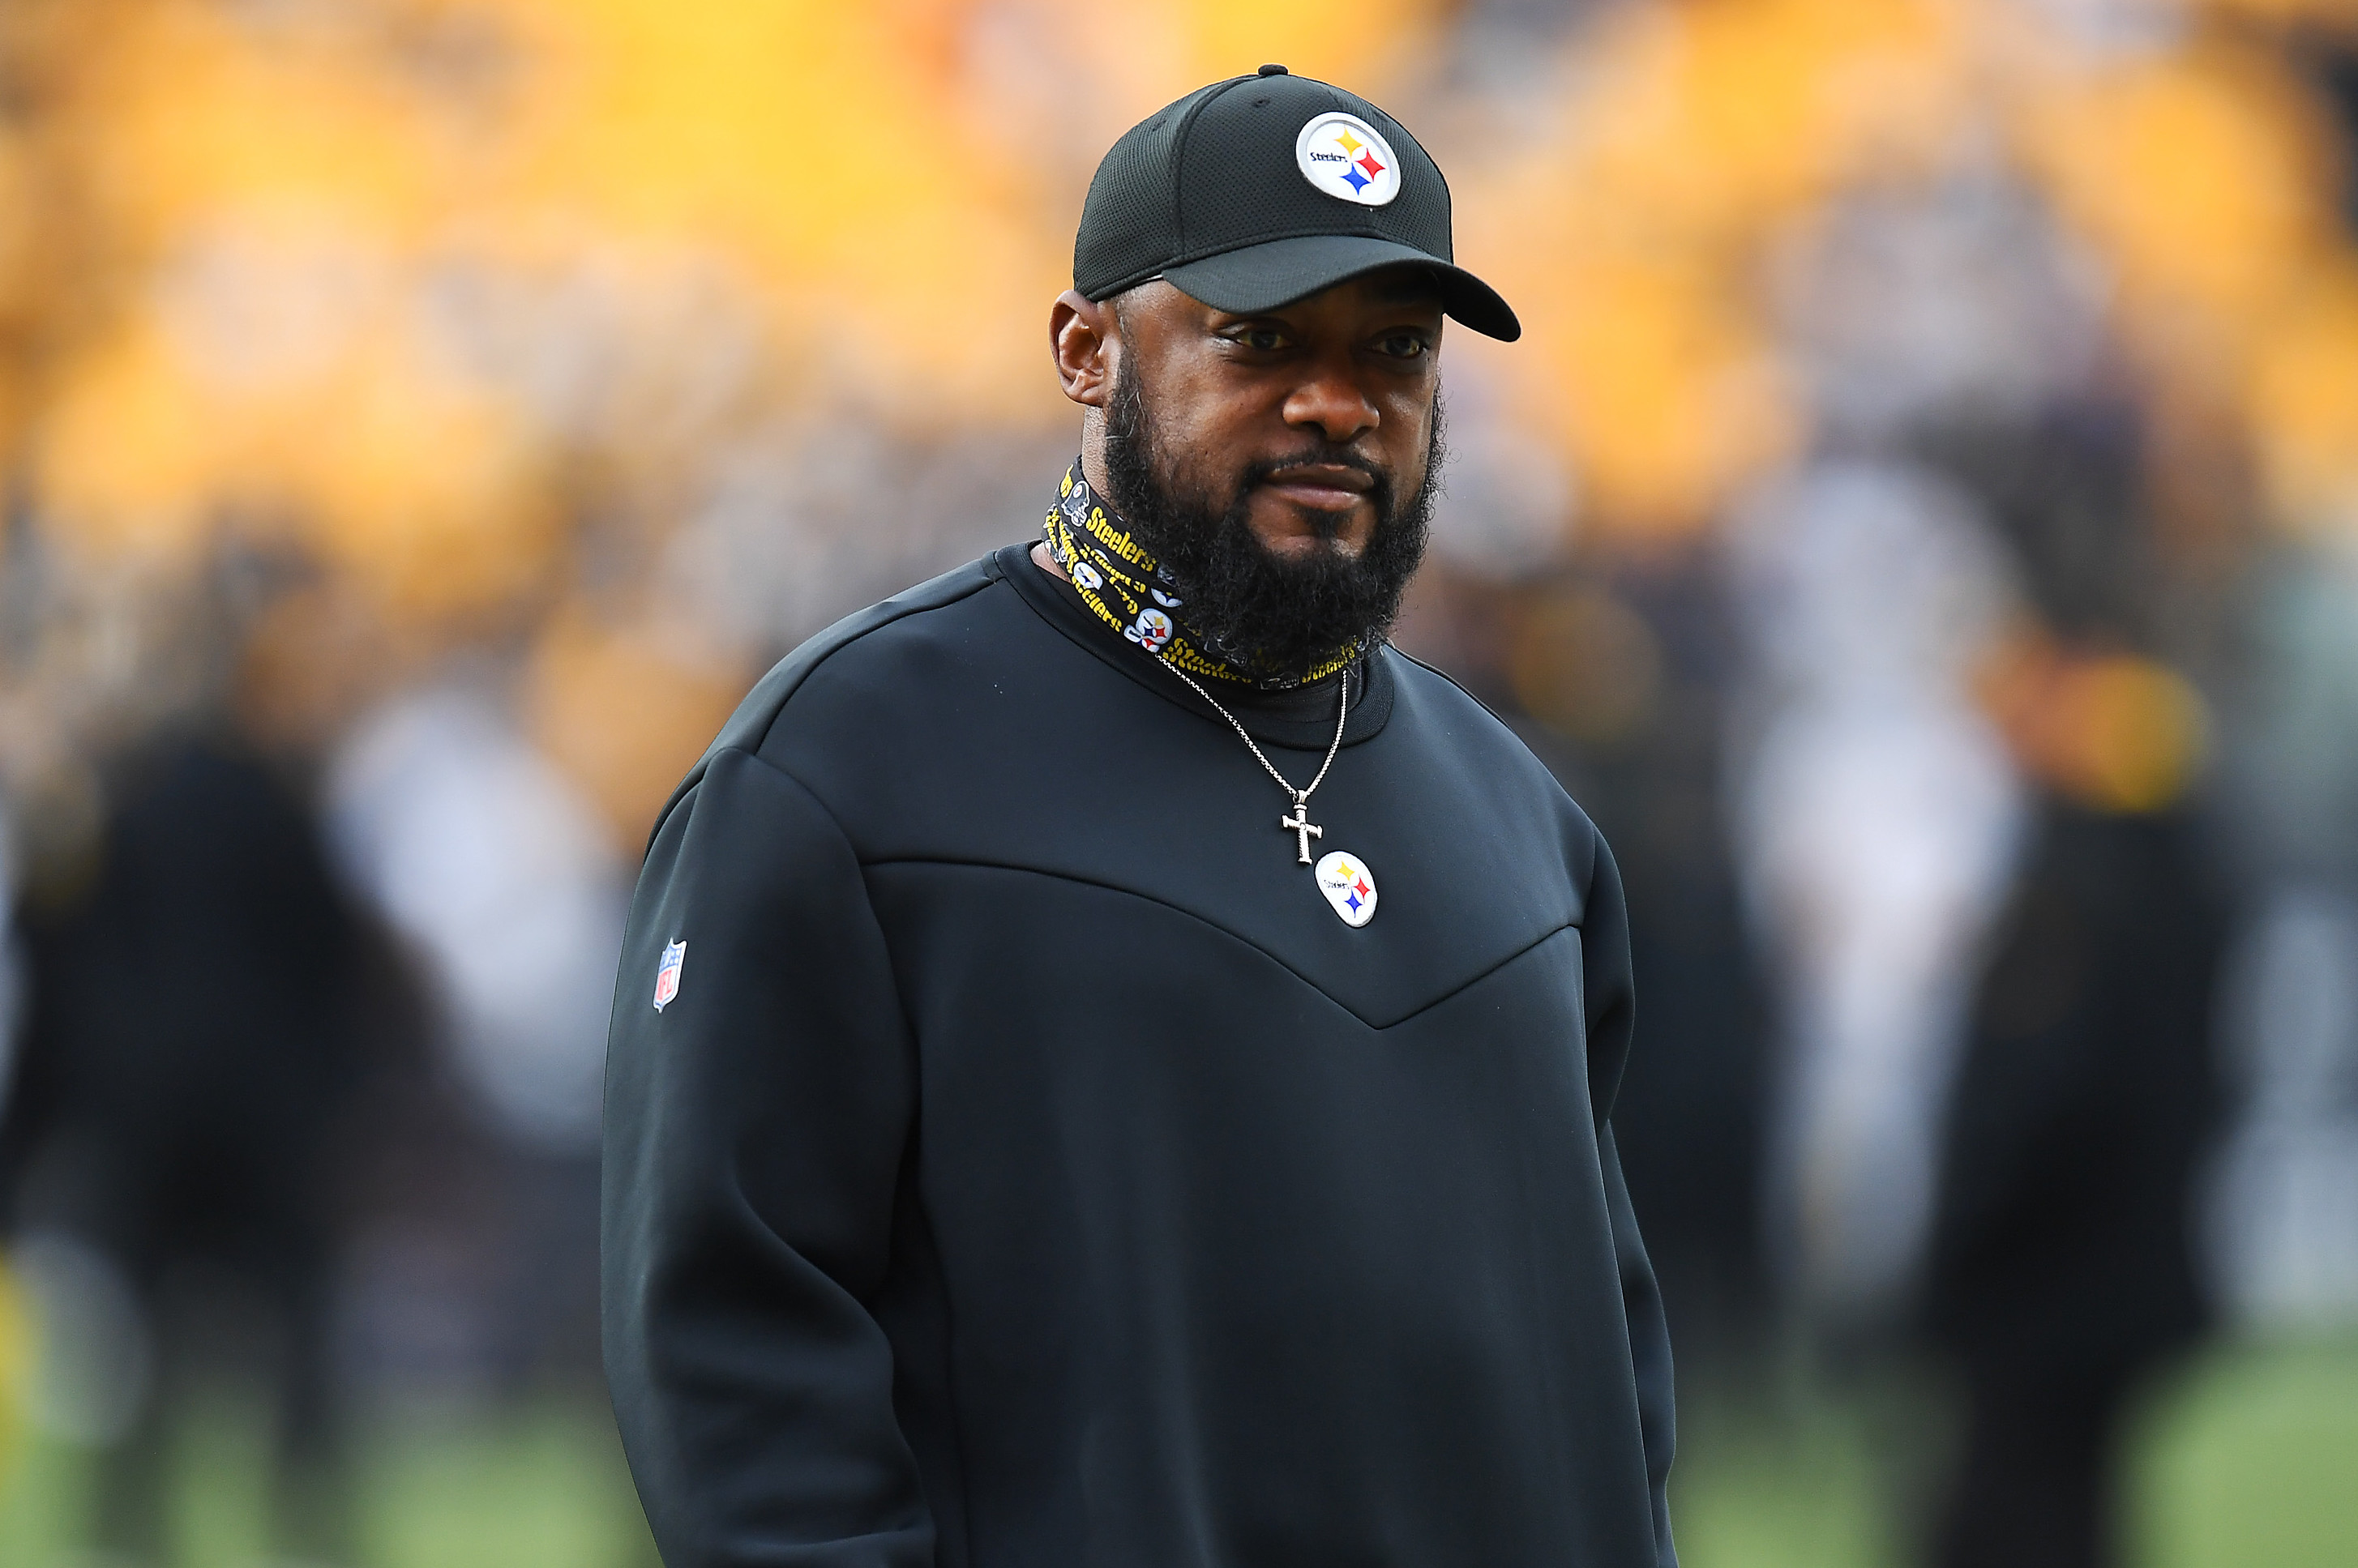 Steelers' Mike Tomlin: All Options on Table to Find QB to Succeed Ben Roethlisberger